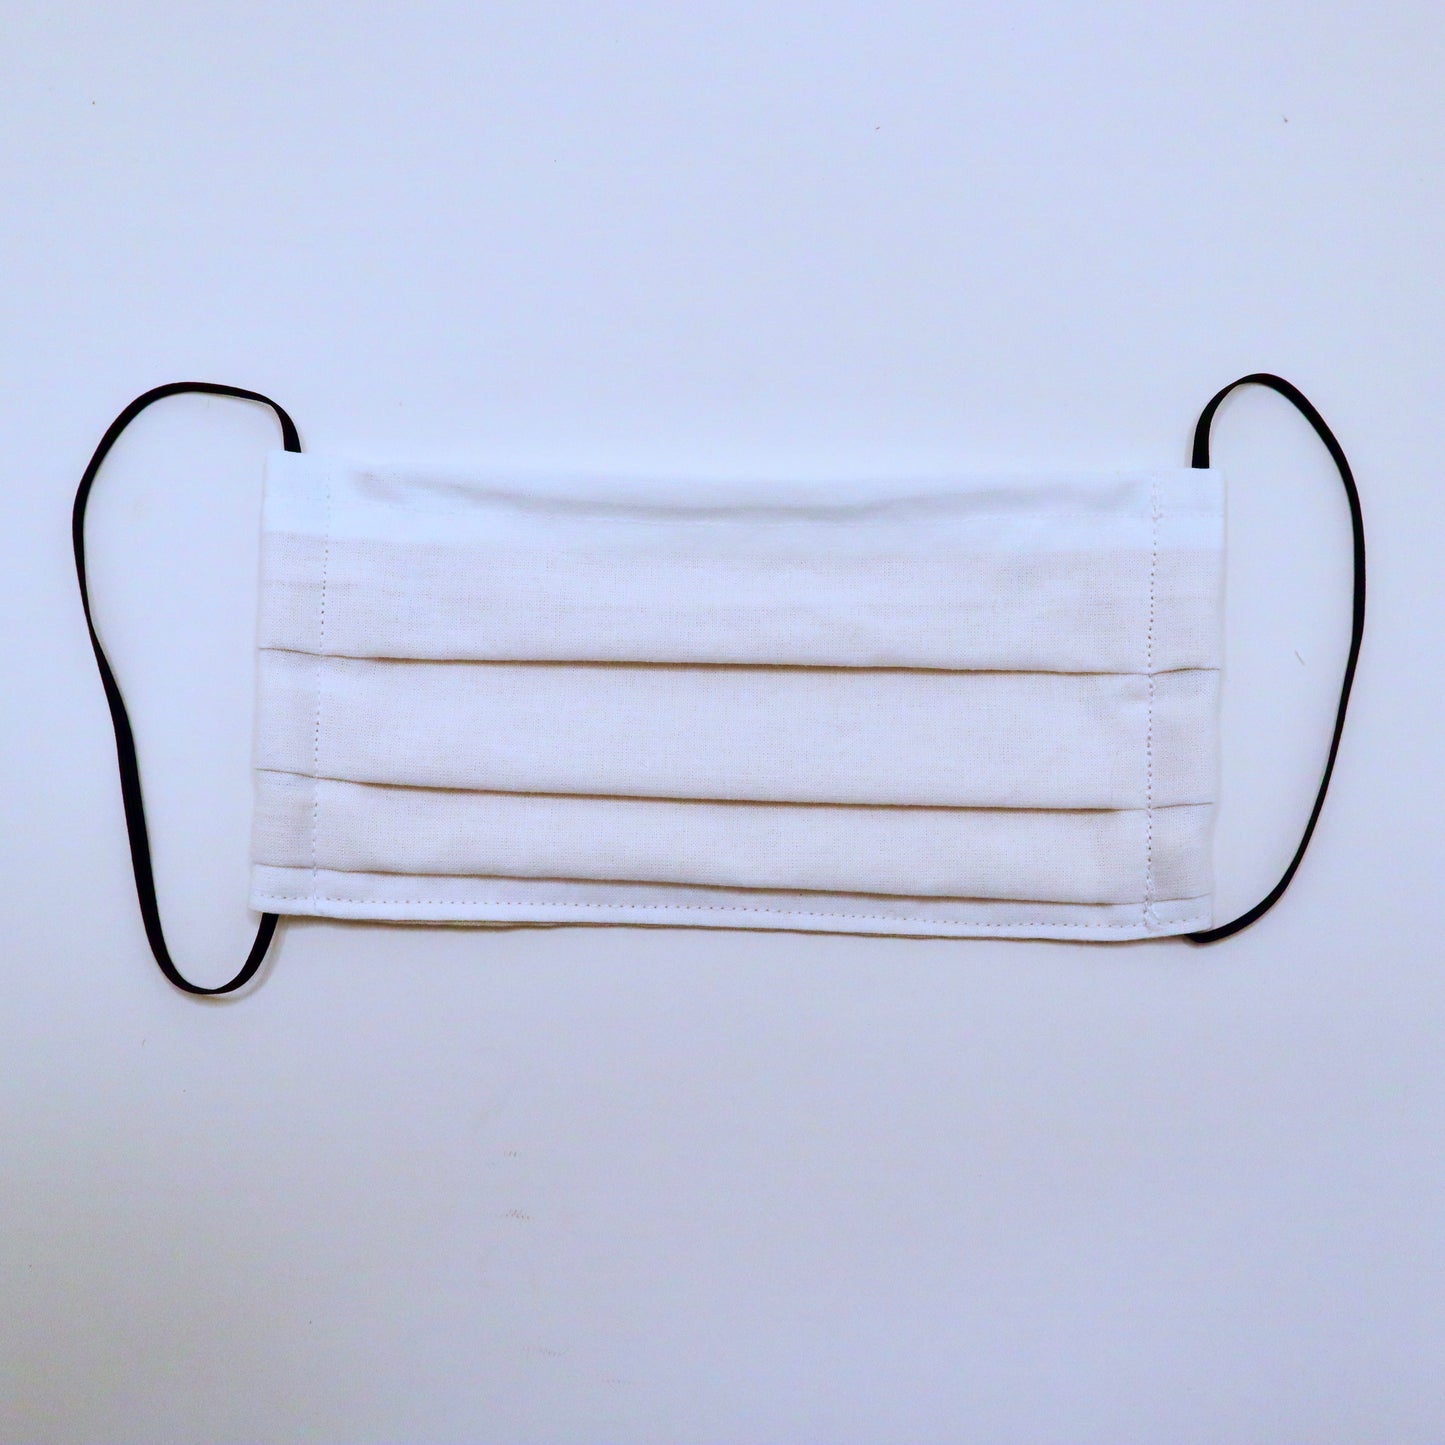 White 2 Layer Cotton Face Mask with Filter Pocket, Nose Wire, Adjustable Ear Loops